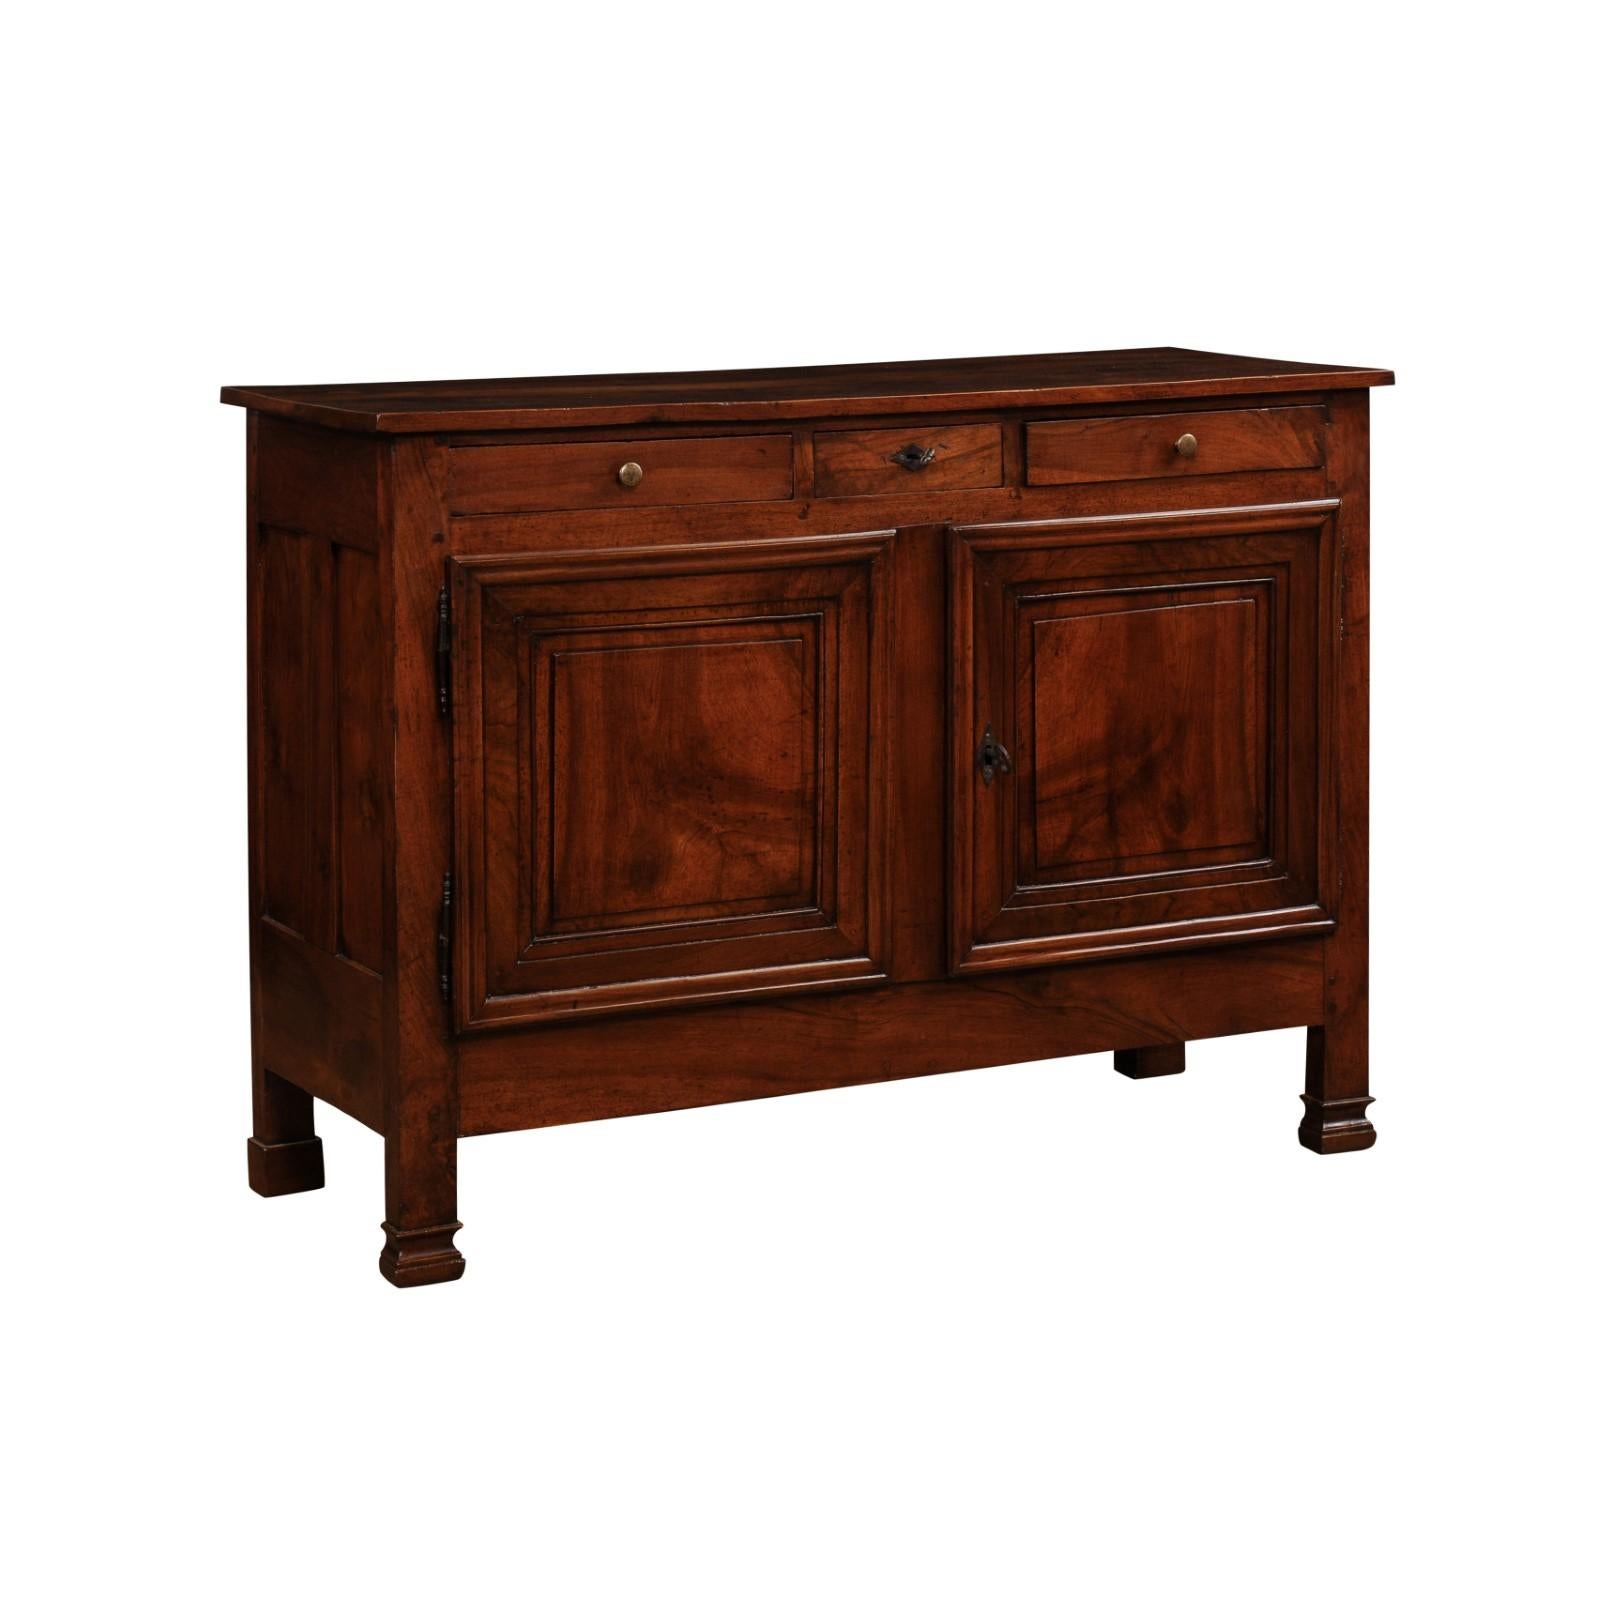 An Italian walnut buffet from the 19th century, with three drawers, a pair of molded doors and delicately carved front feet. Created in Italy during the 19th century, this walnut buffet features a simple rectangular top sitting above two drawers